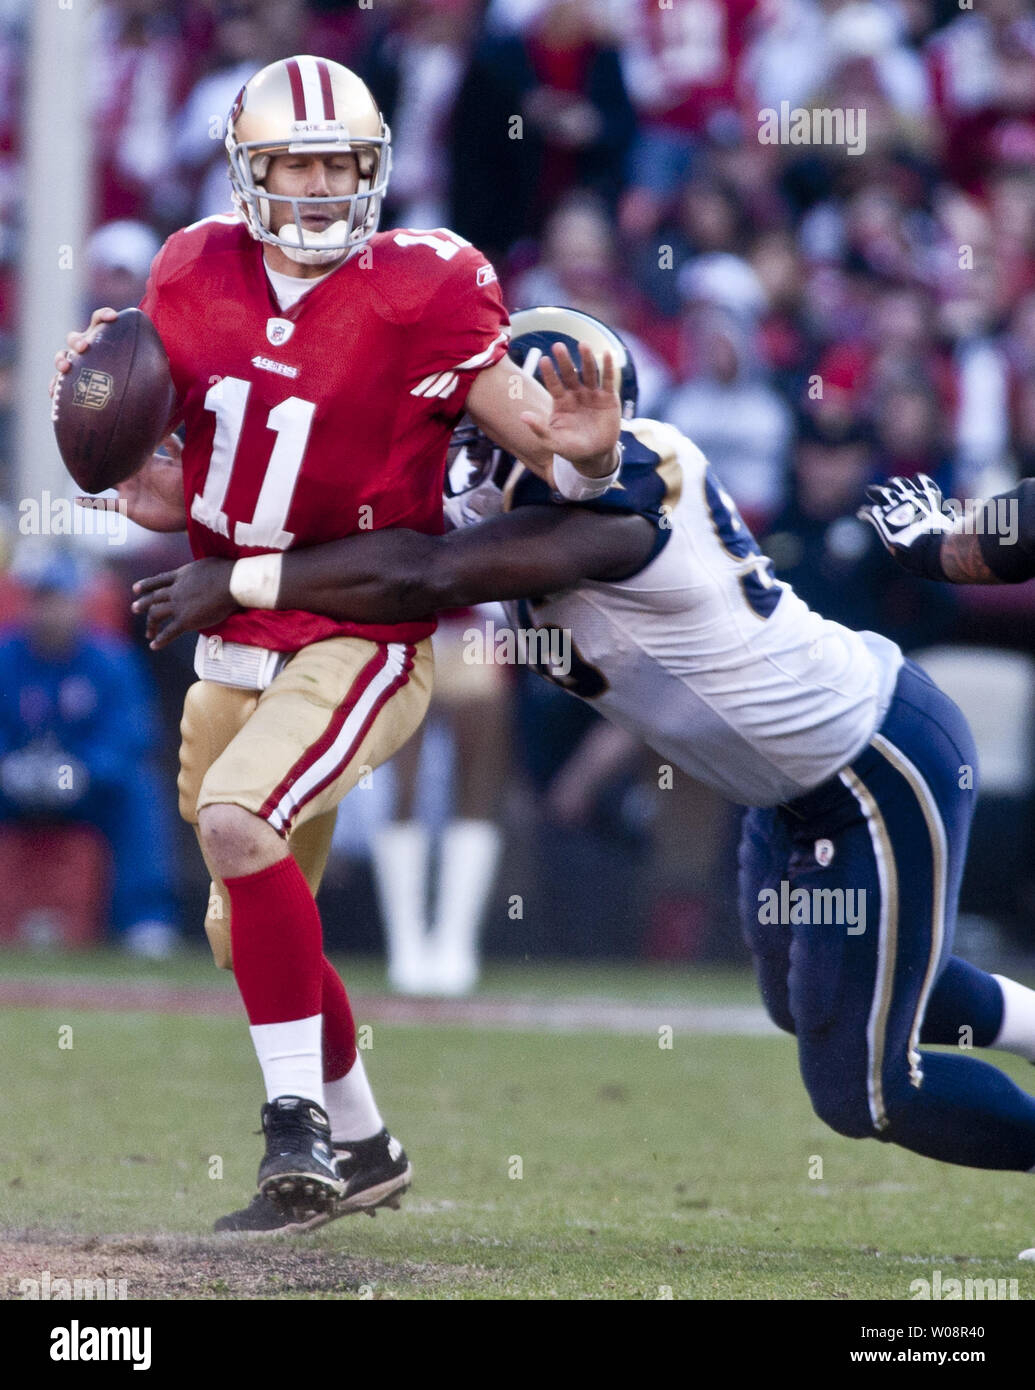 San Francisco 49ers QB Alex Smith (11) is sacked by St. Louis Rams James Hall in the third quarter at Candlestick Park in San Francisco on December 4, 2011. The 49ers defeated the Rams 26-0 to clinch the NFC West.  UPI/Terry Schmitt Stock Photo